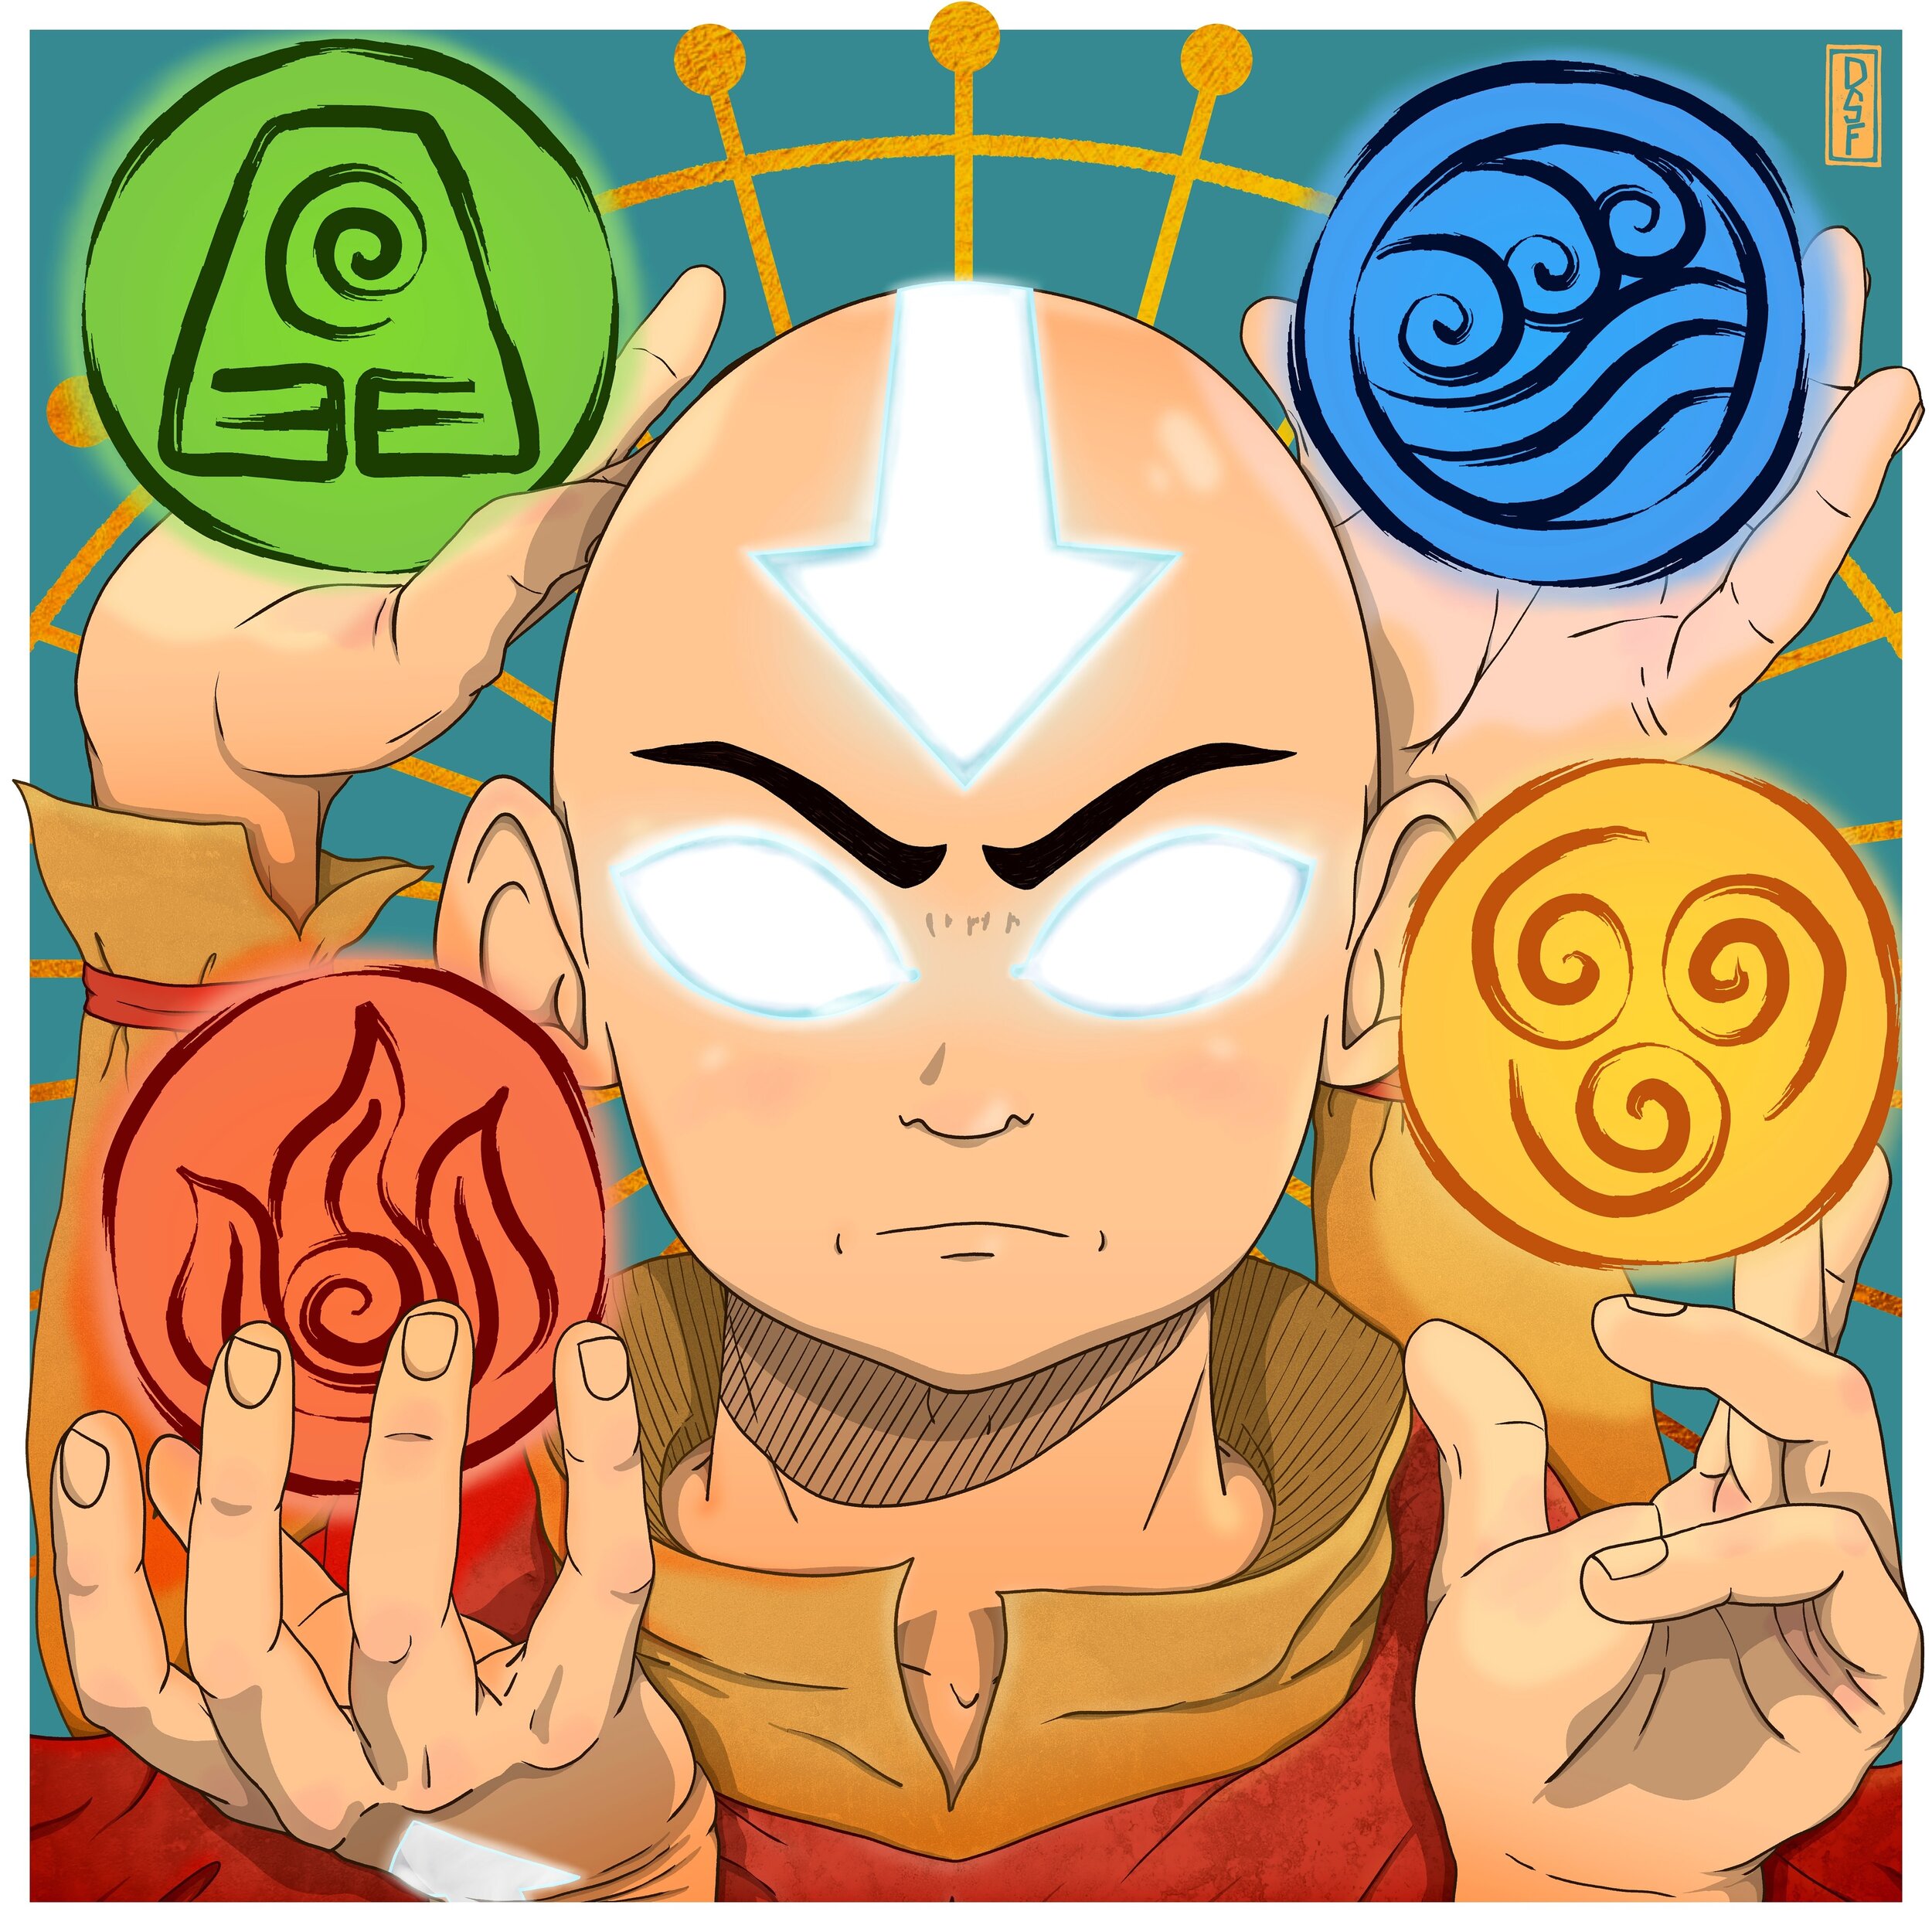 &ldquo;No Avatar is ever the same person. You and the flame change with every moment, every generation. YOU are one flame, and you are many.&rdquo;

I originally did a rough sketch of this piece around 4 years ago, but with the release of the live-ac